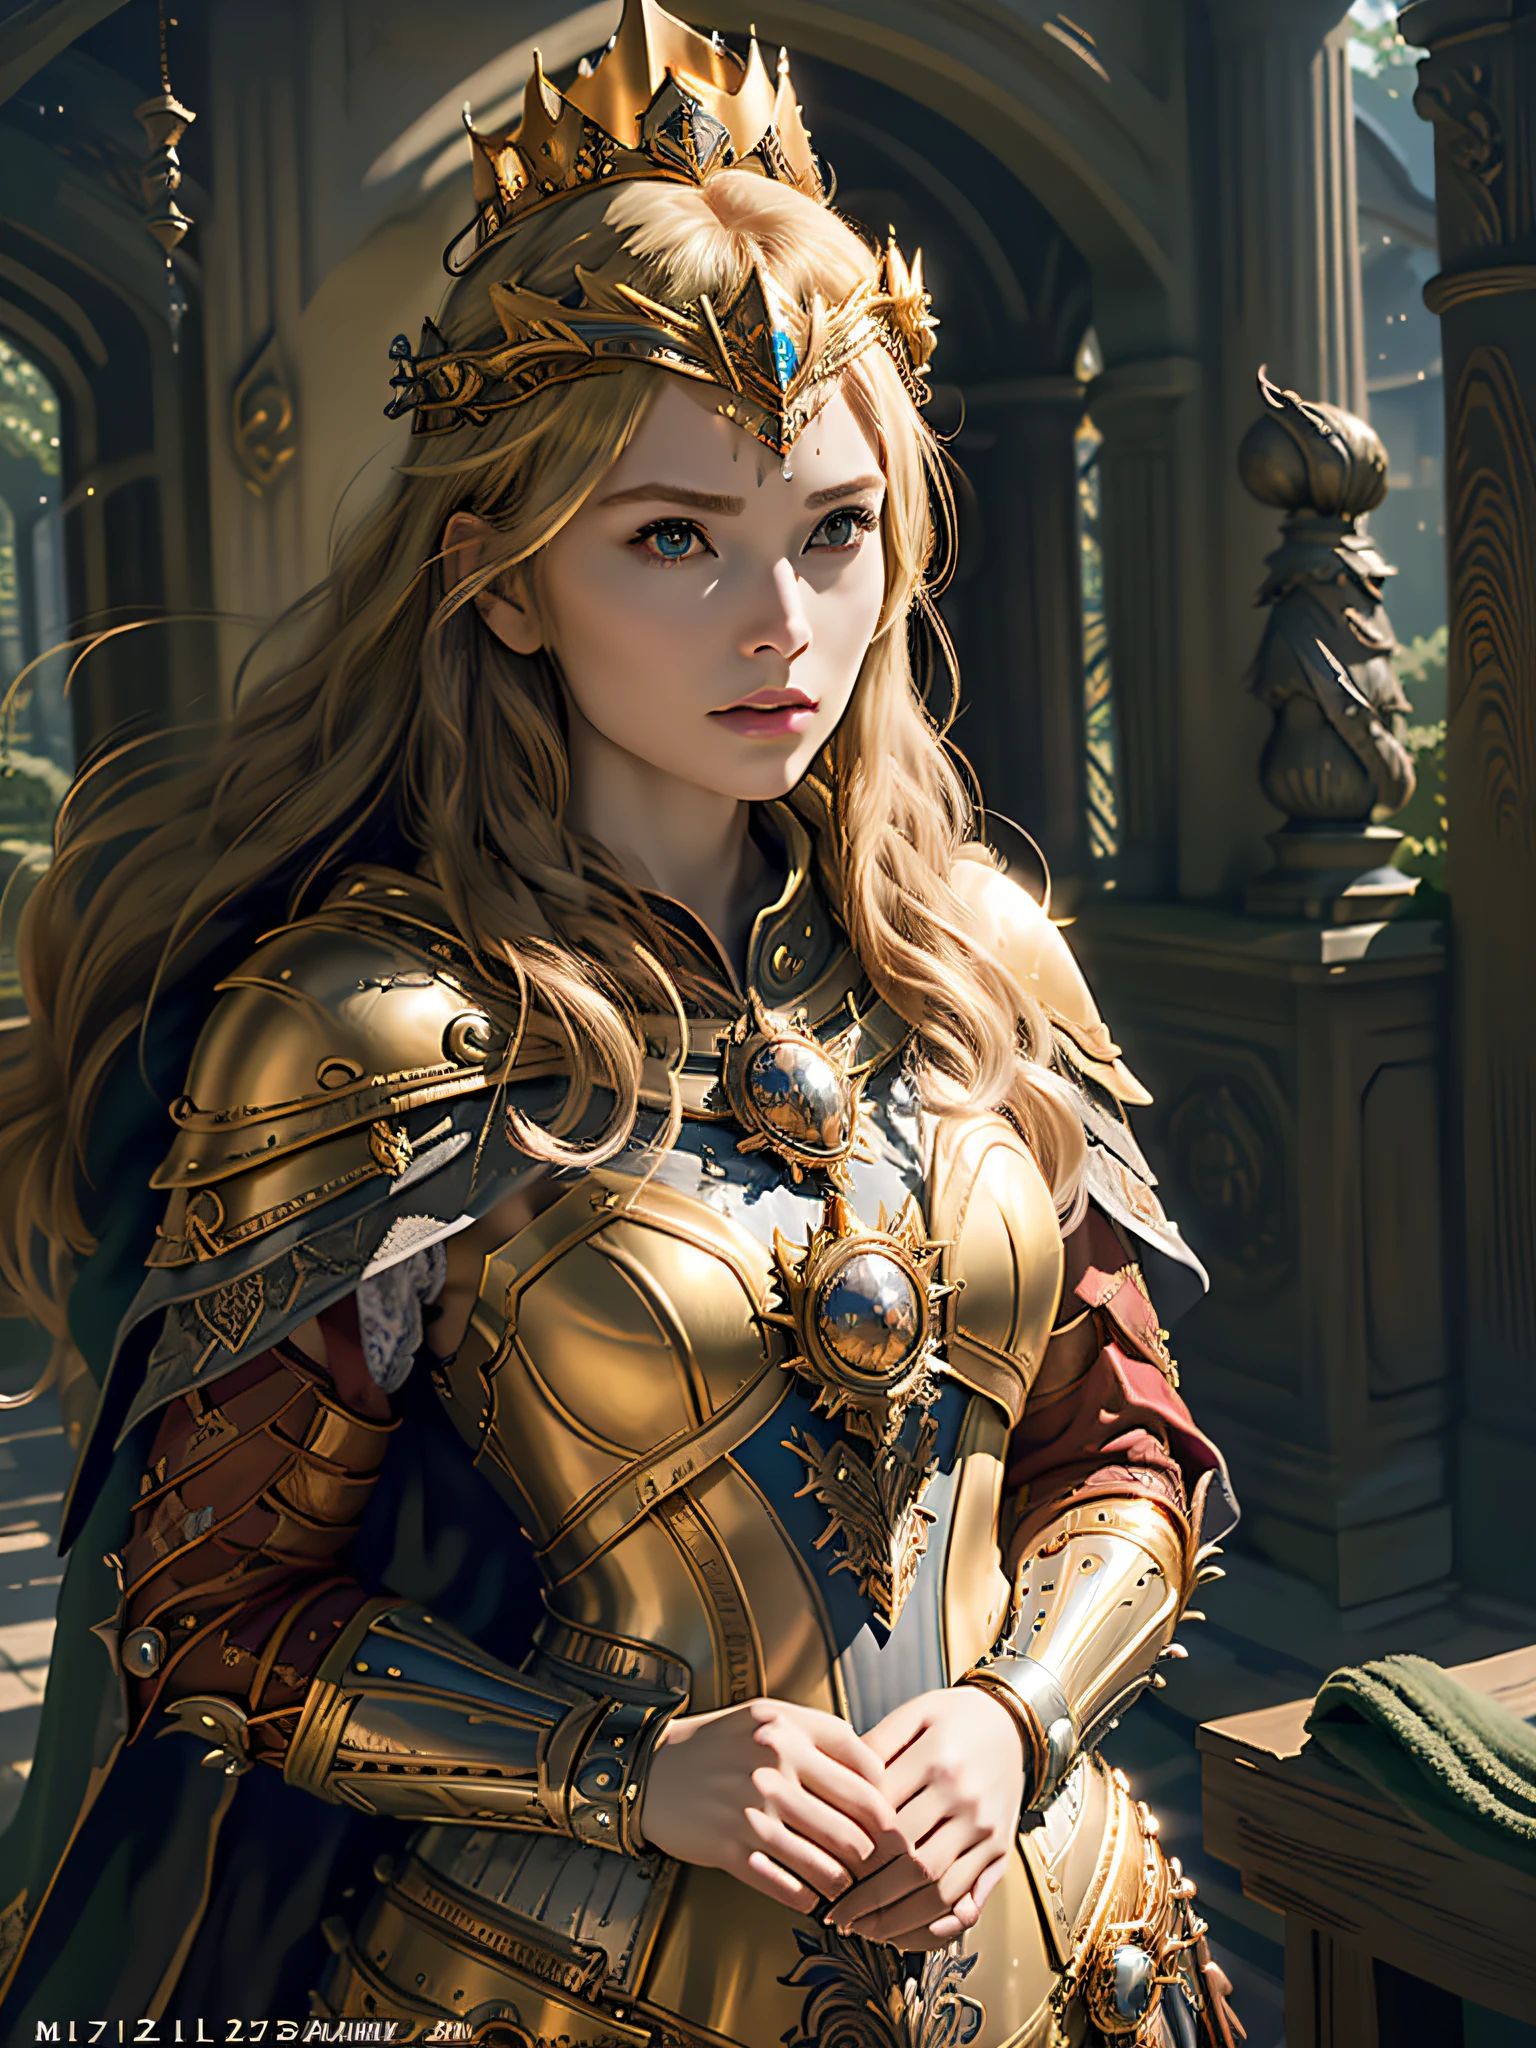 (Masterpiece, Top Quality, Top Quality, Official Art, Beautiful and Aesthetic: 1.2), (1 Girl), (Warrior Queen Golden Armor, Fur-Lined Cape, Bejeweled Crown: 1.2), Serious, Blonde, Colossal, Ultimate Jewel, 100 Pieces, Gorgeous, Photo